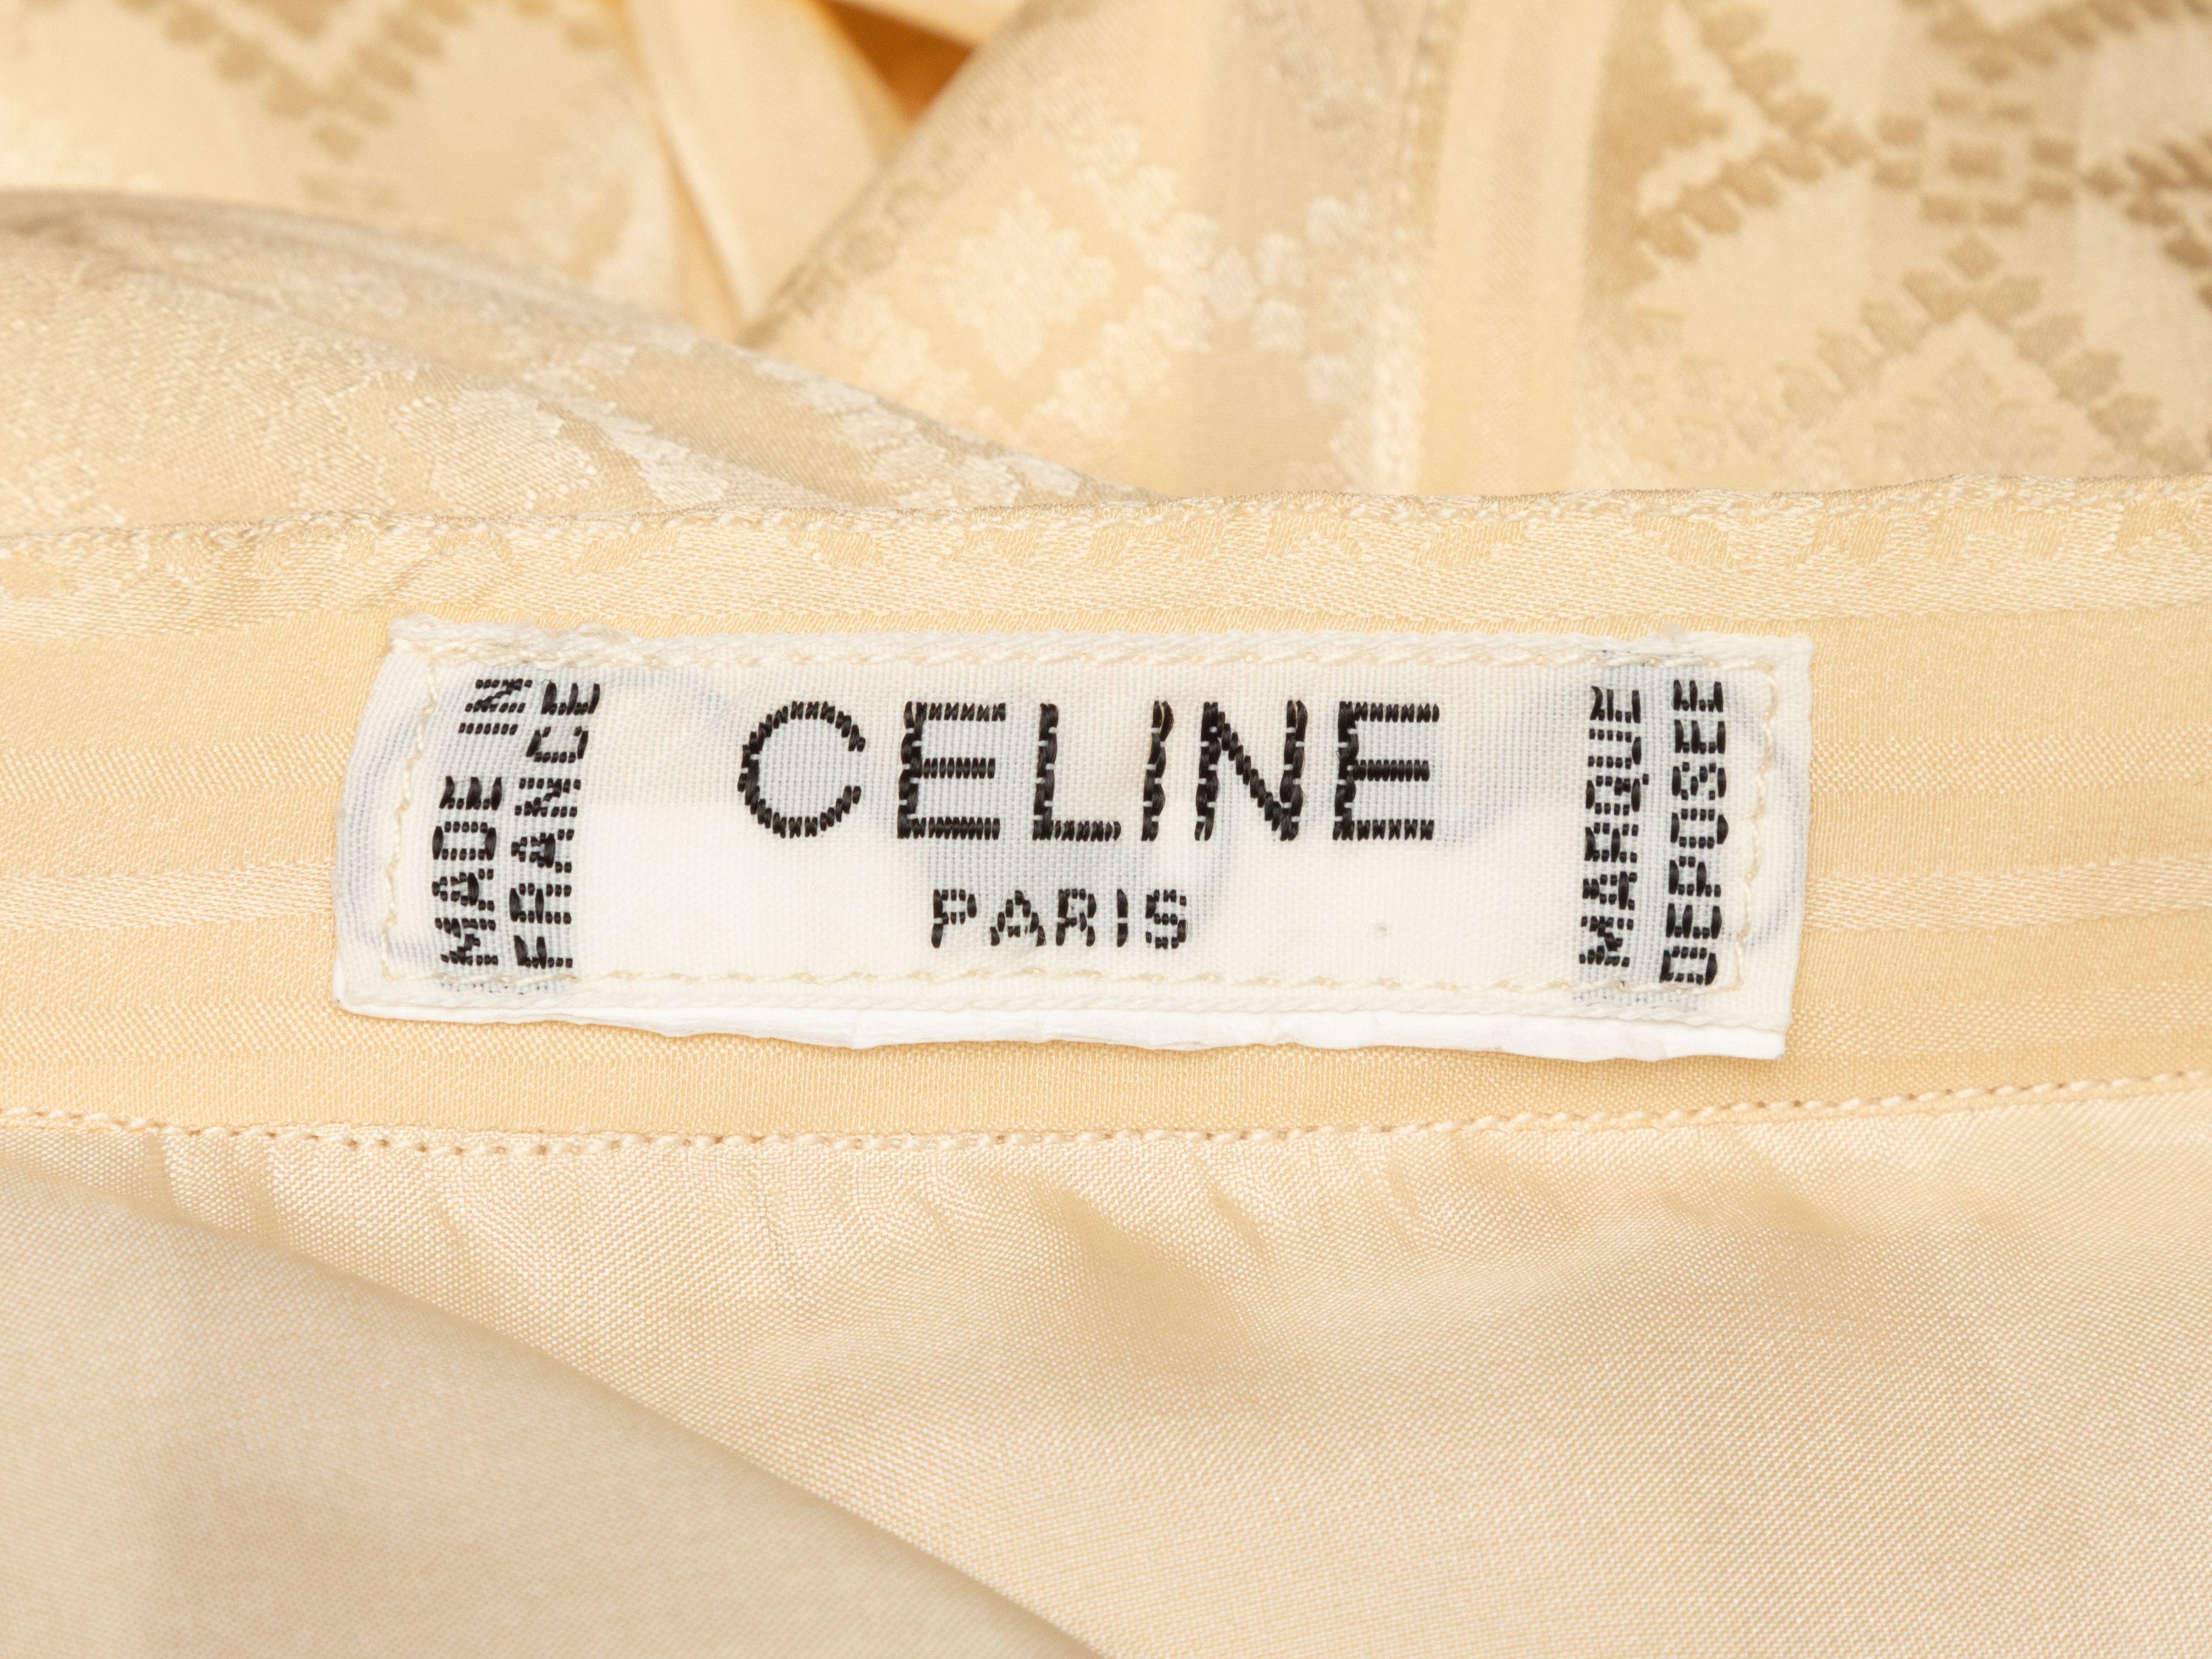 Product Details: Vintage cream clover patterned pleated silk skirt by Celine. Zip closure at back. 27